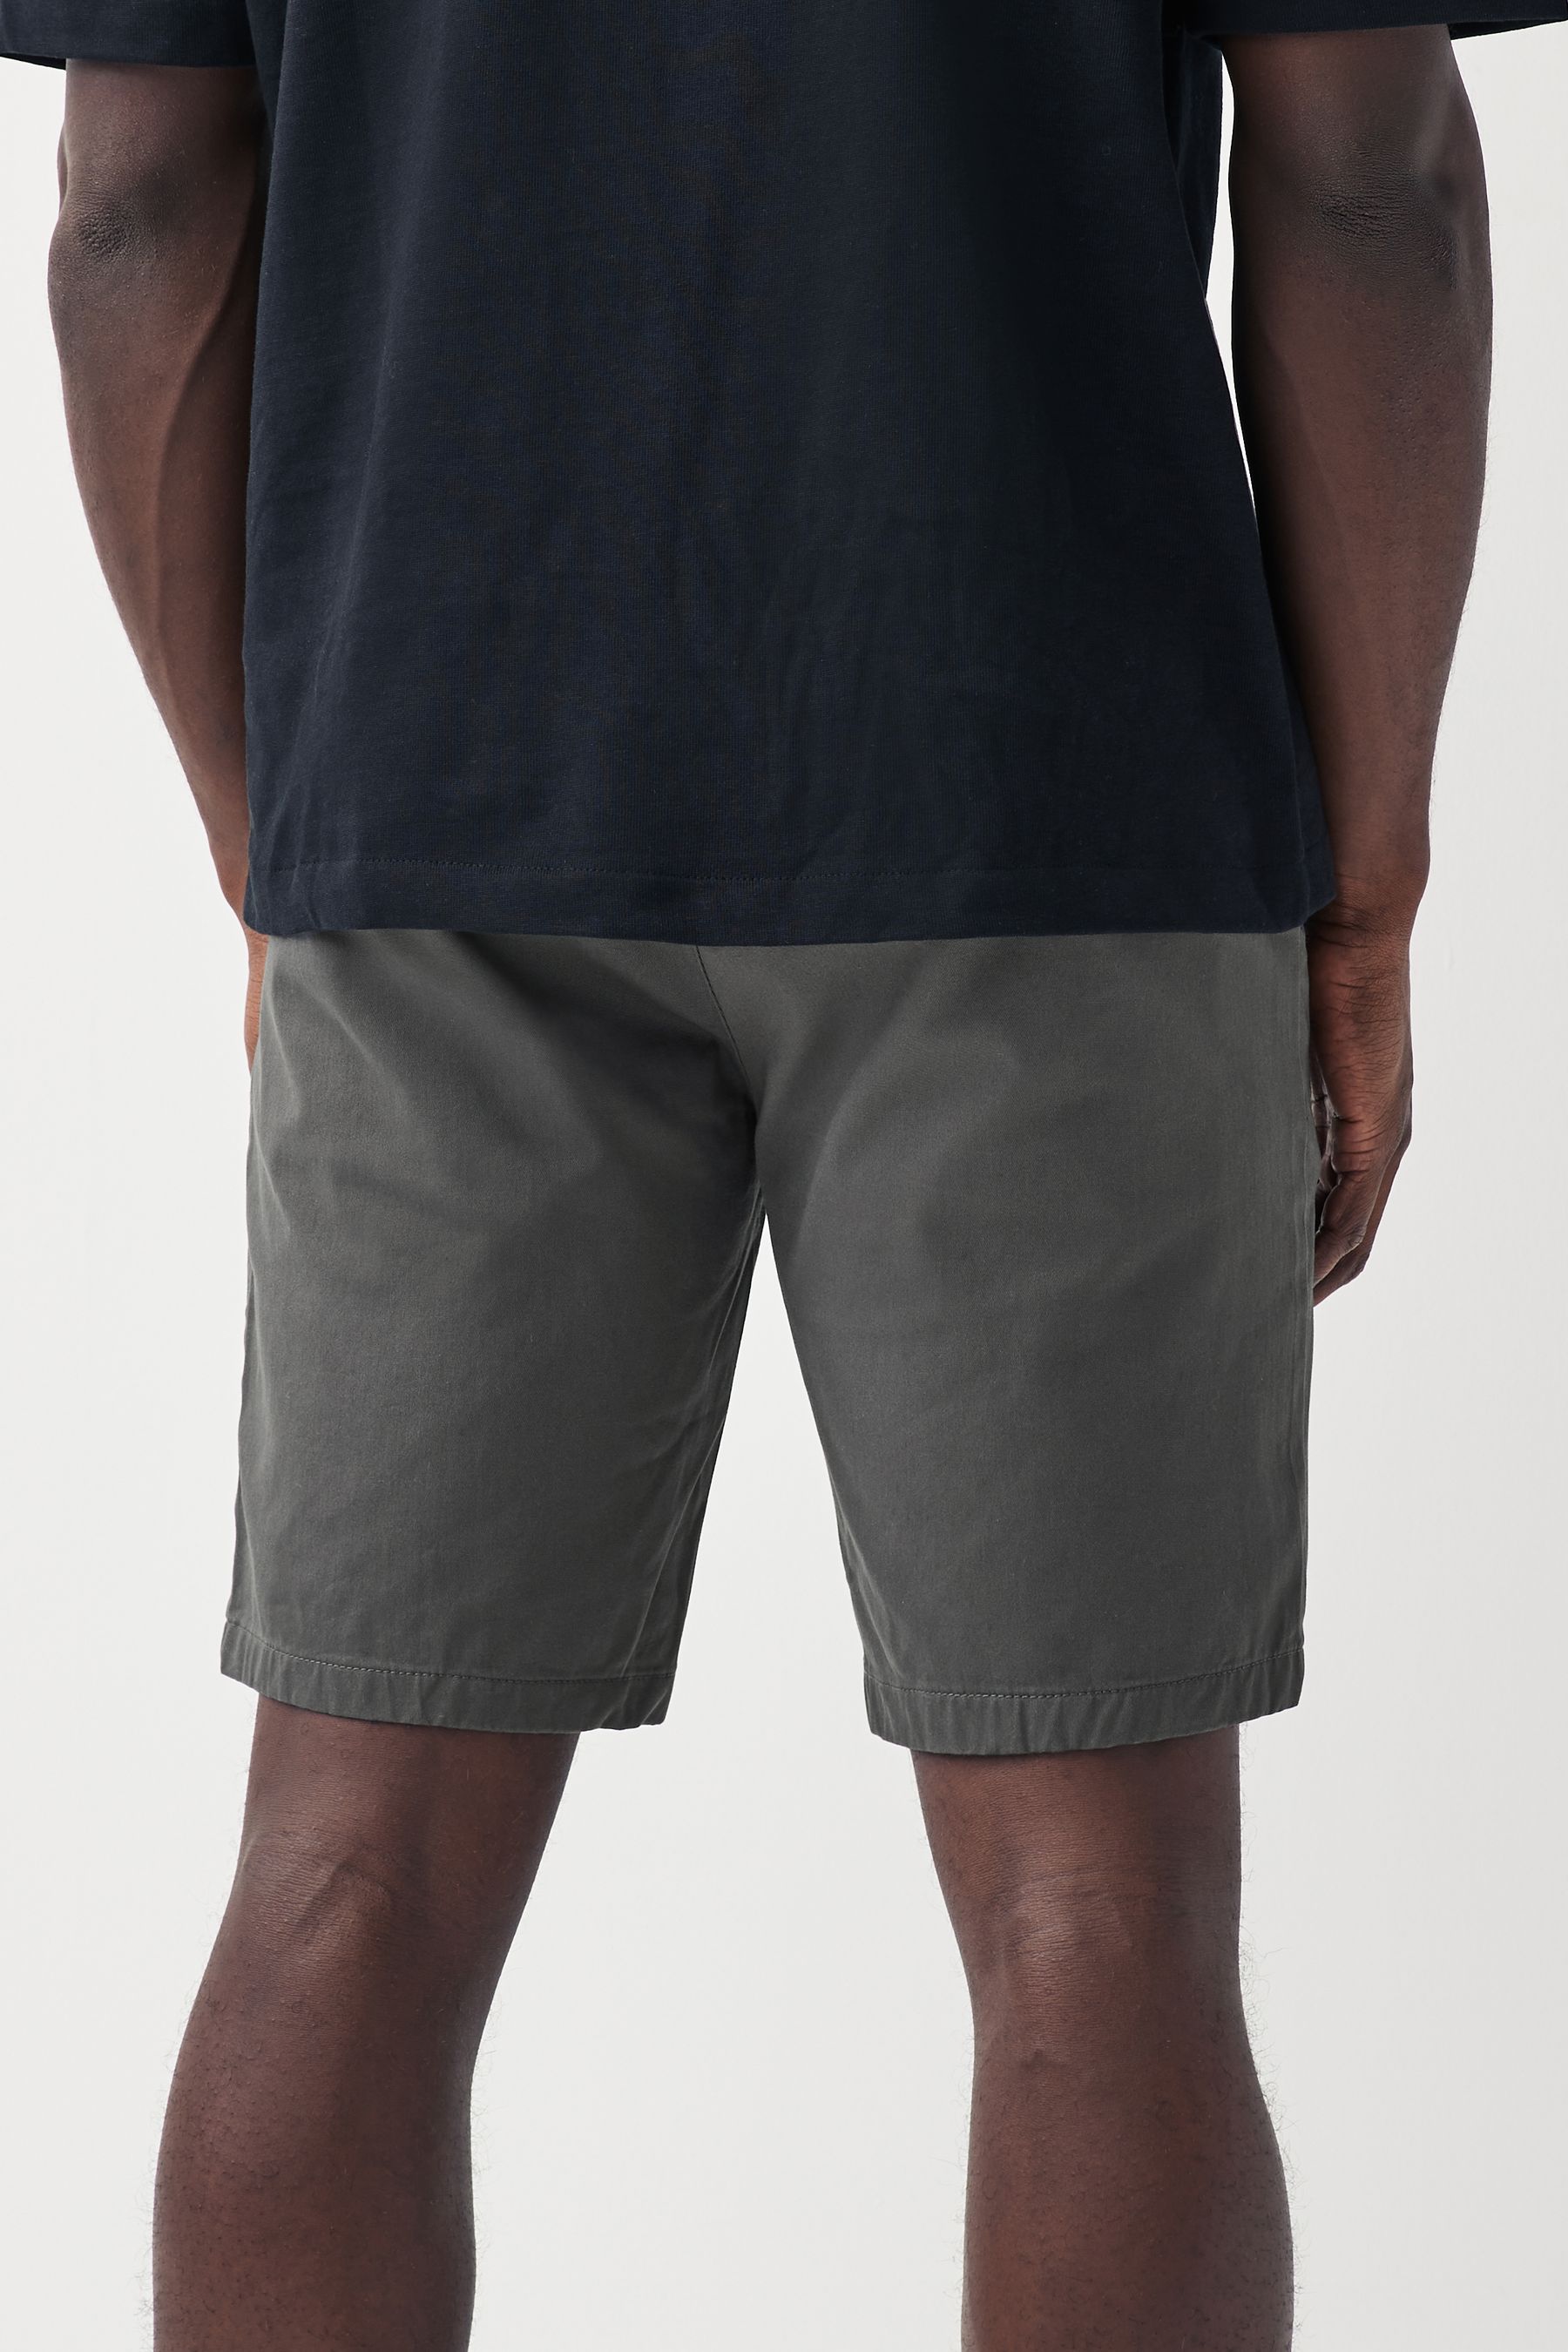 Buy Charcoal Grey Slim Fit Stretch Chinos Shorts from the Next UK ...